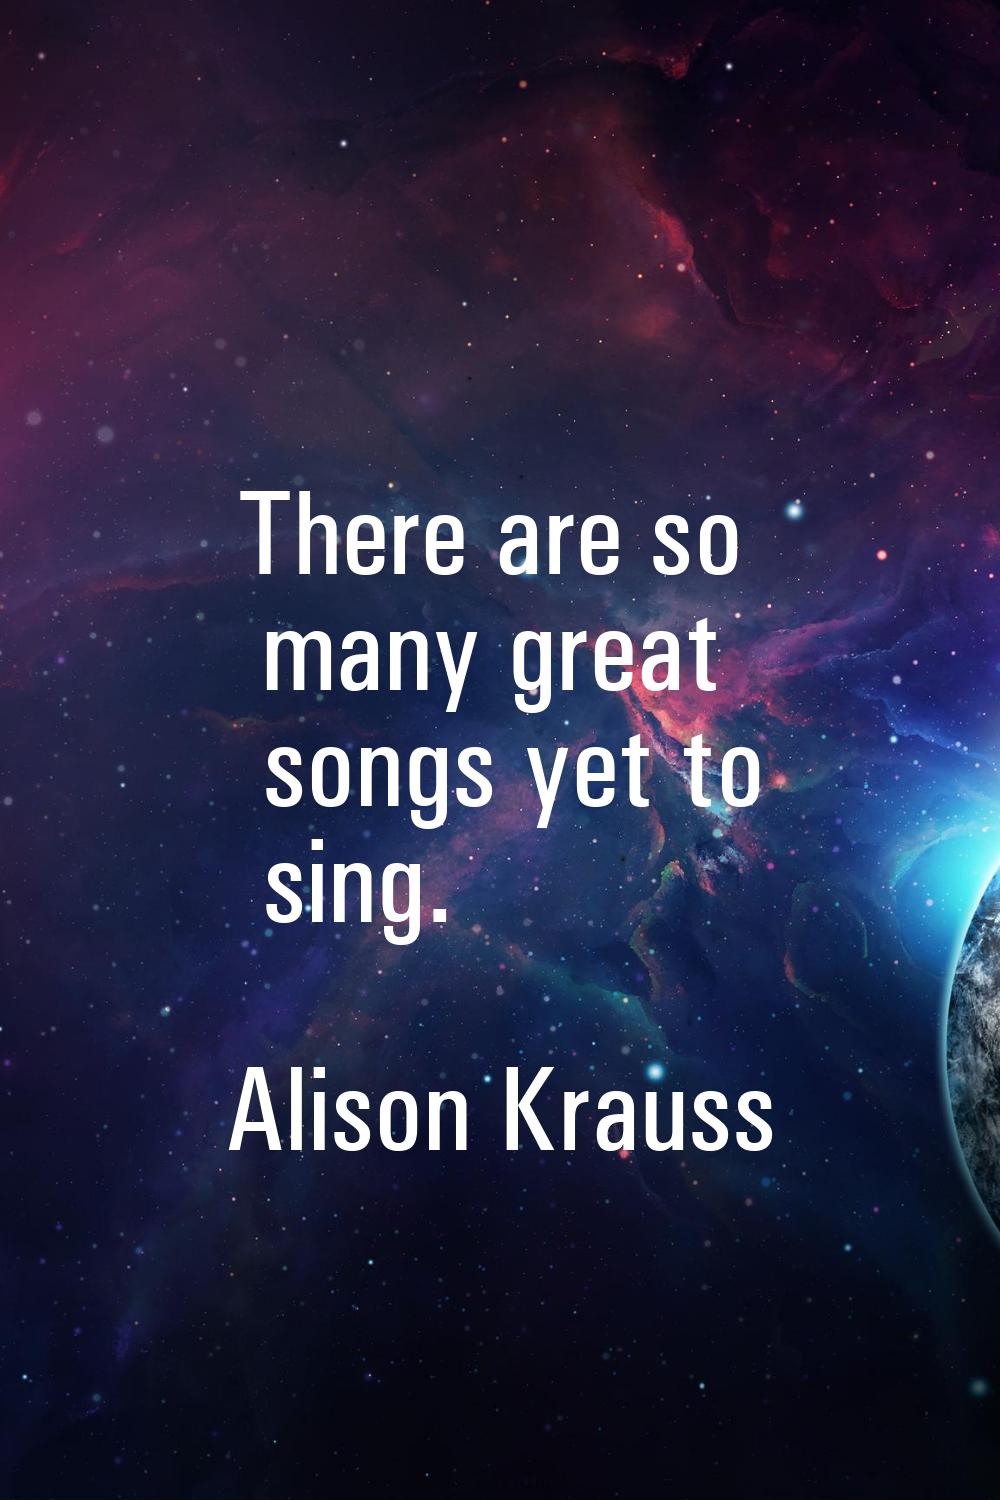 There are so many great songs yet to sing.